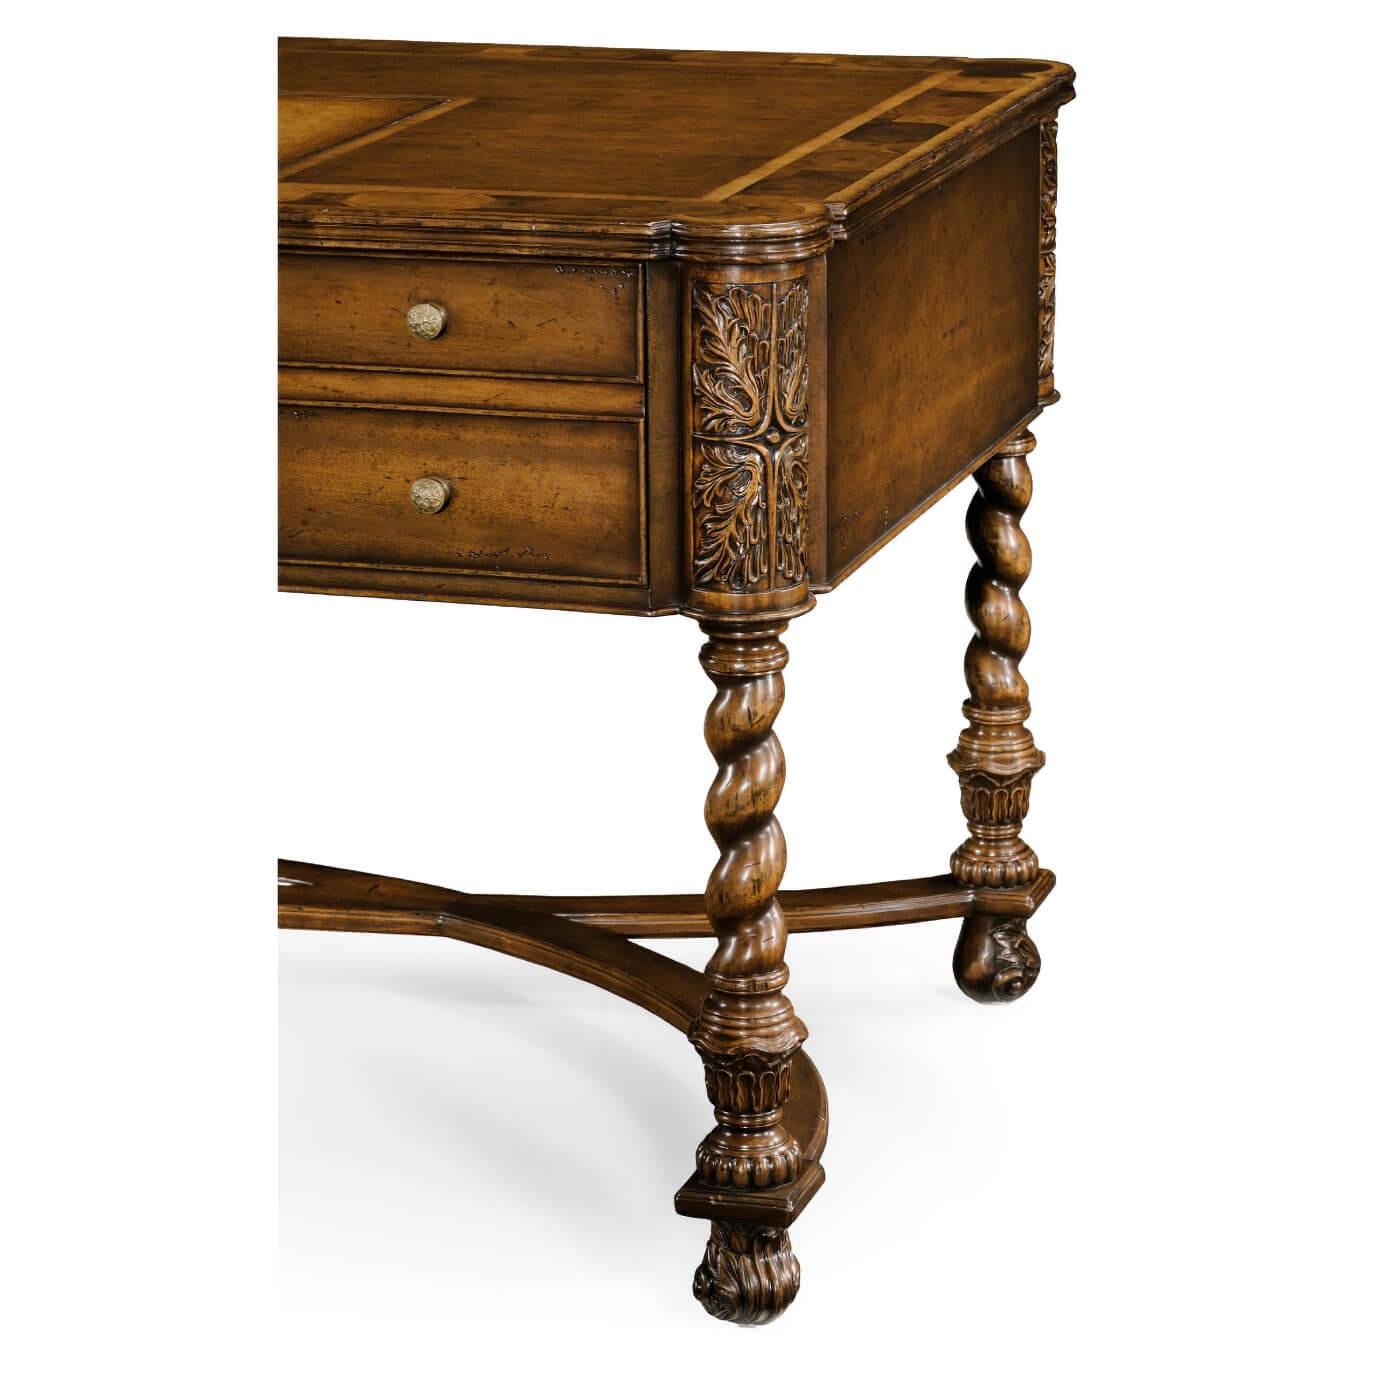 Contemporary William and Mary Style Desk